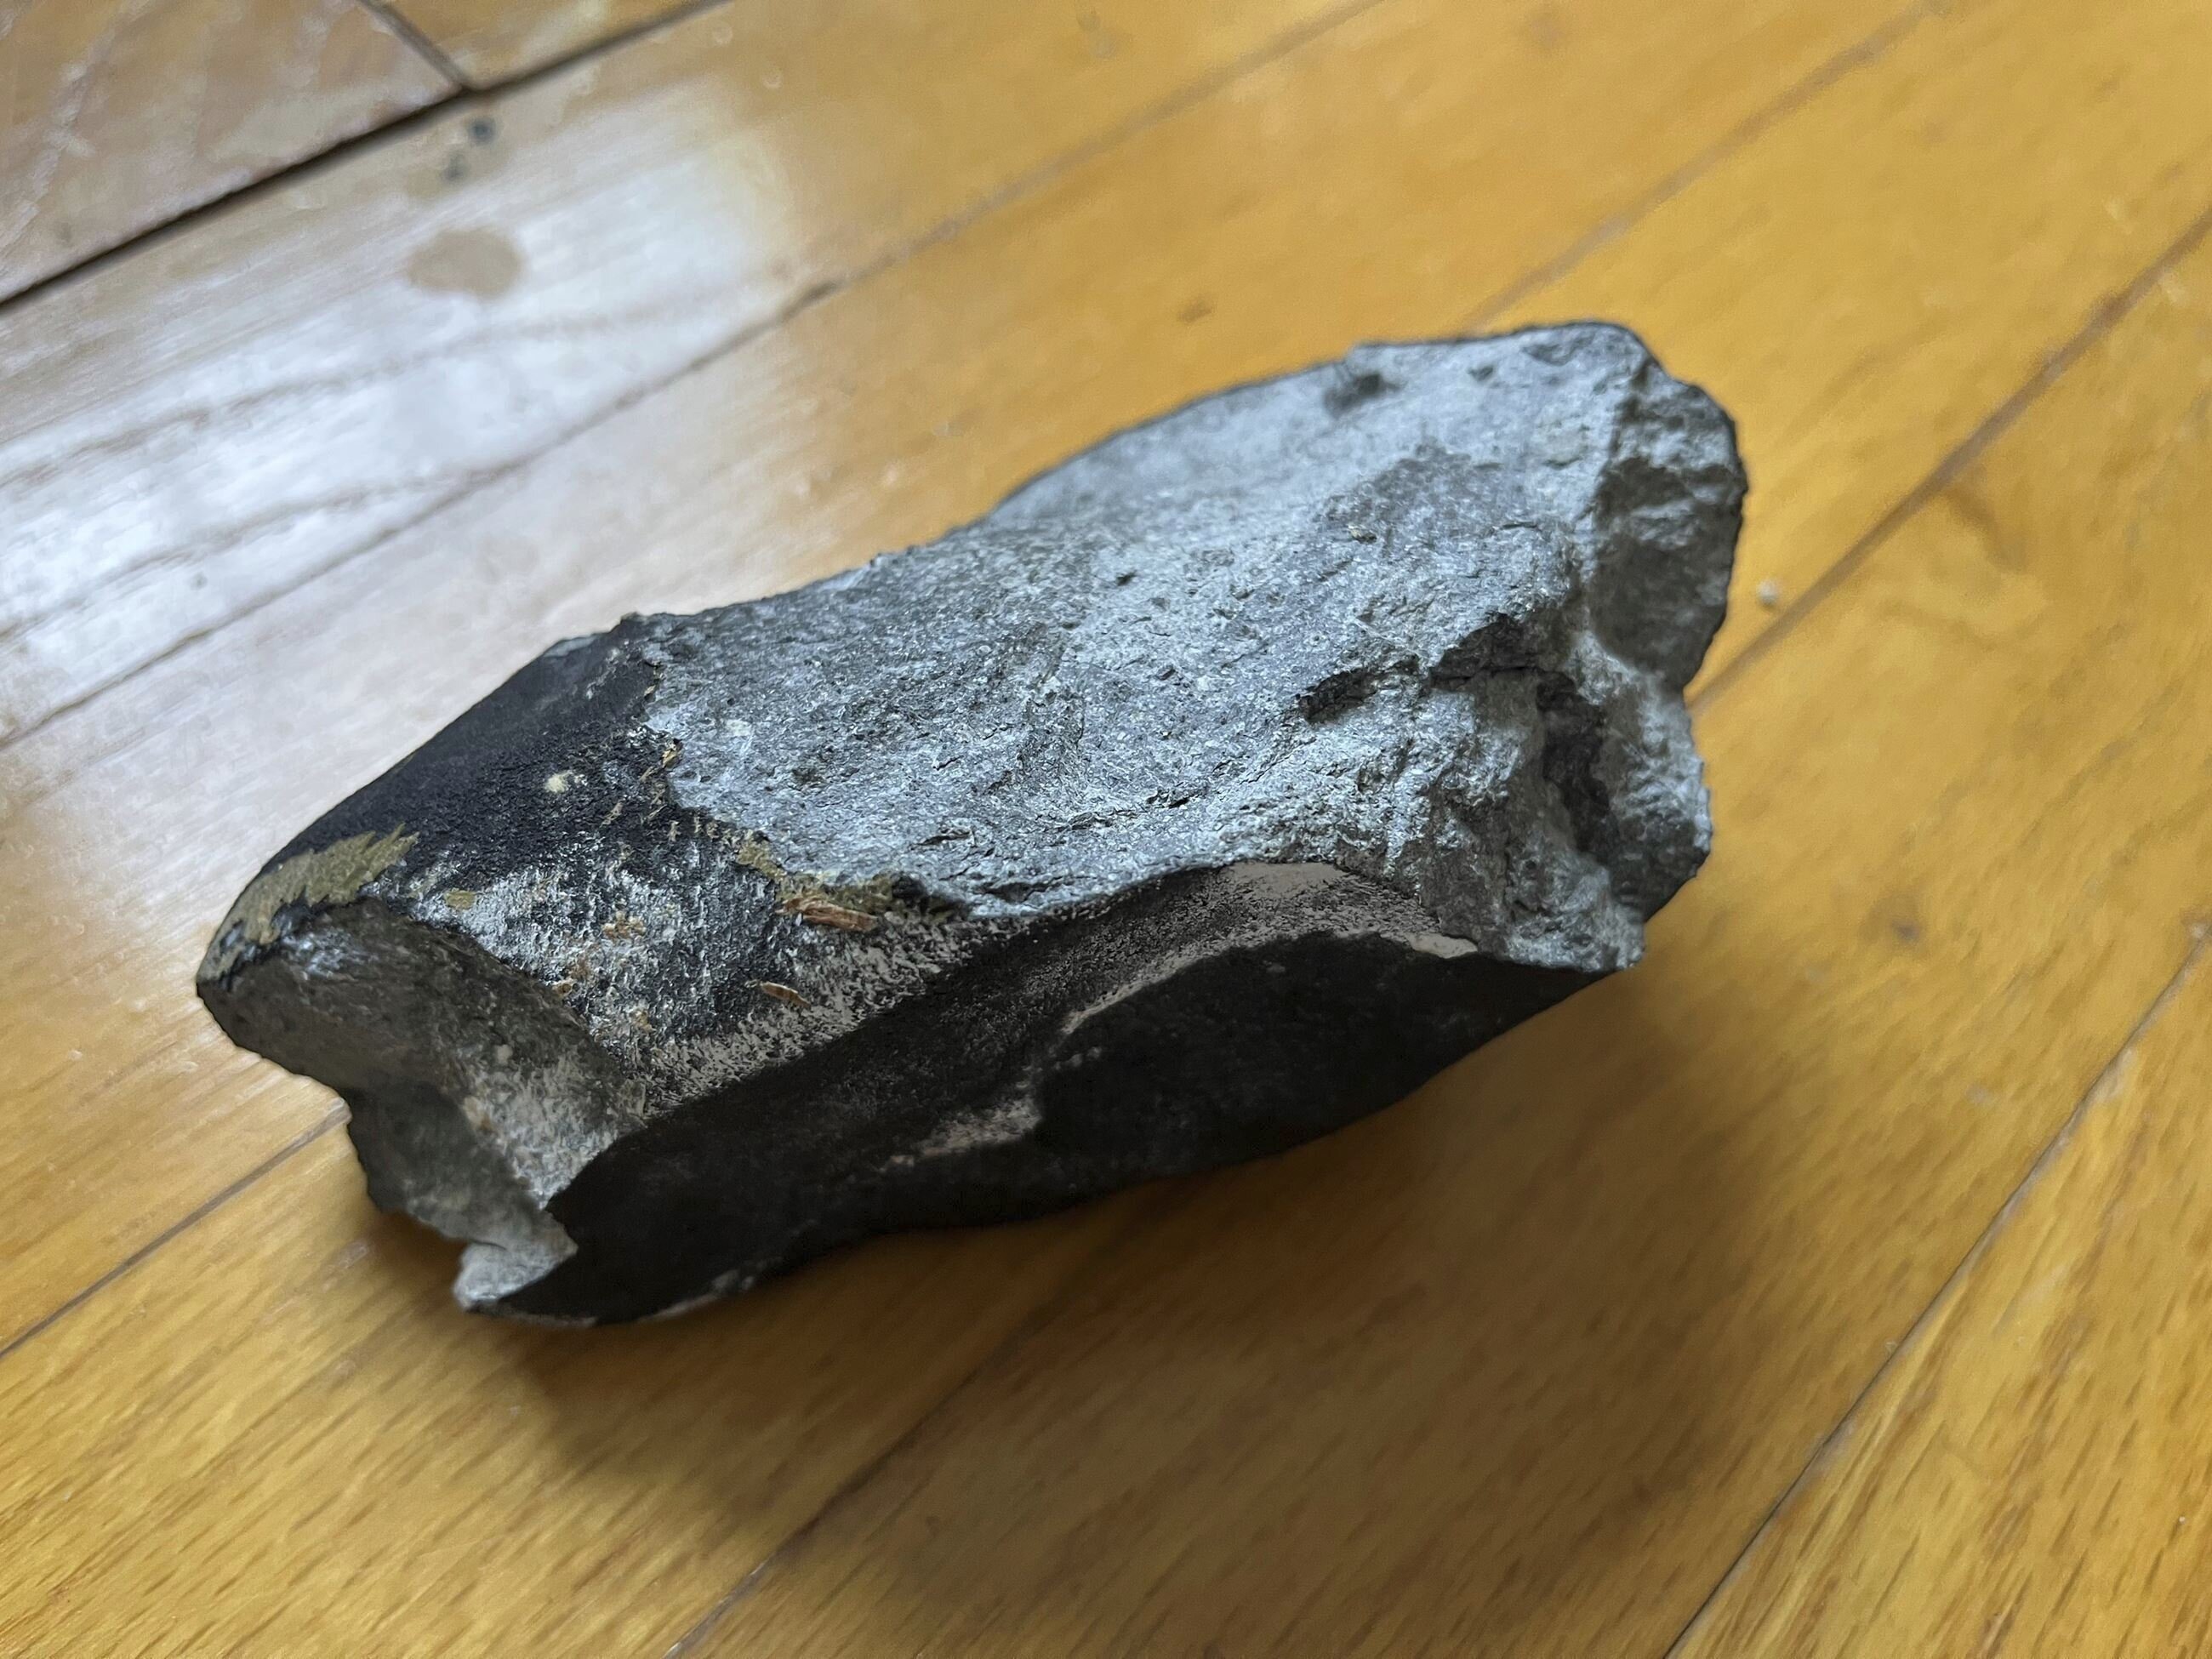 A meteorite crashed into a home in New Jersey and was made of metal.